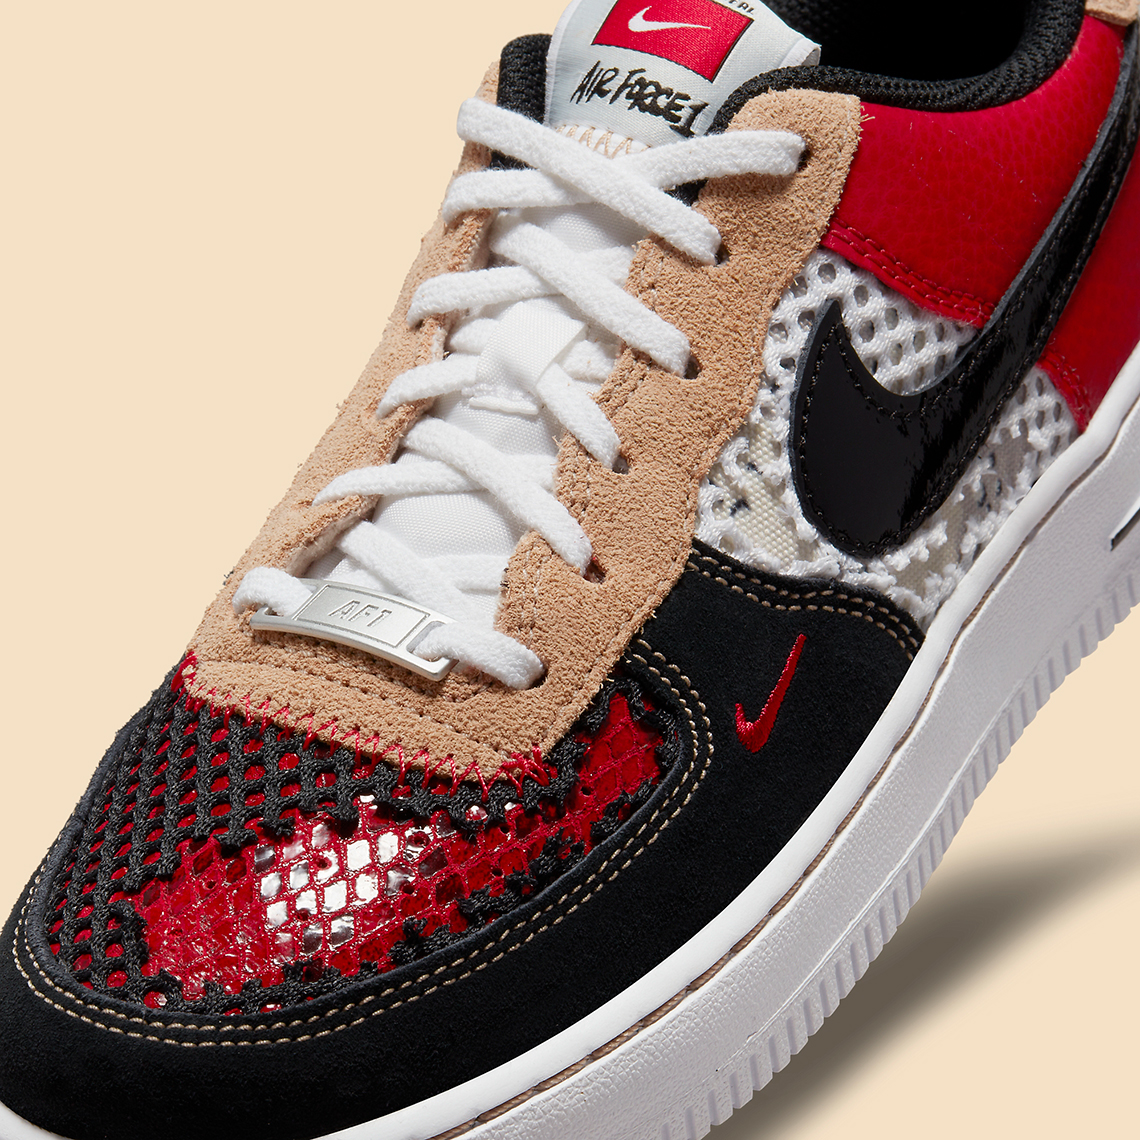 Nike Air Force 1 '07 LV8 'Alter & Reveal' | Red | Men's Size 11